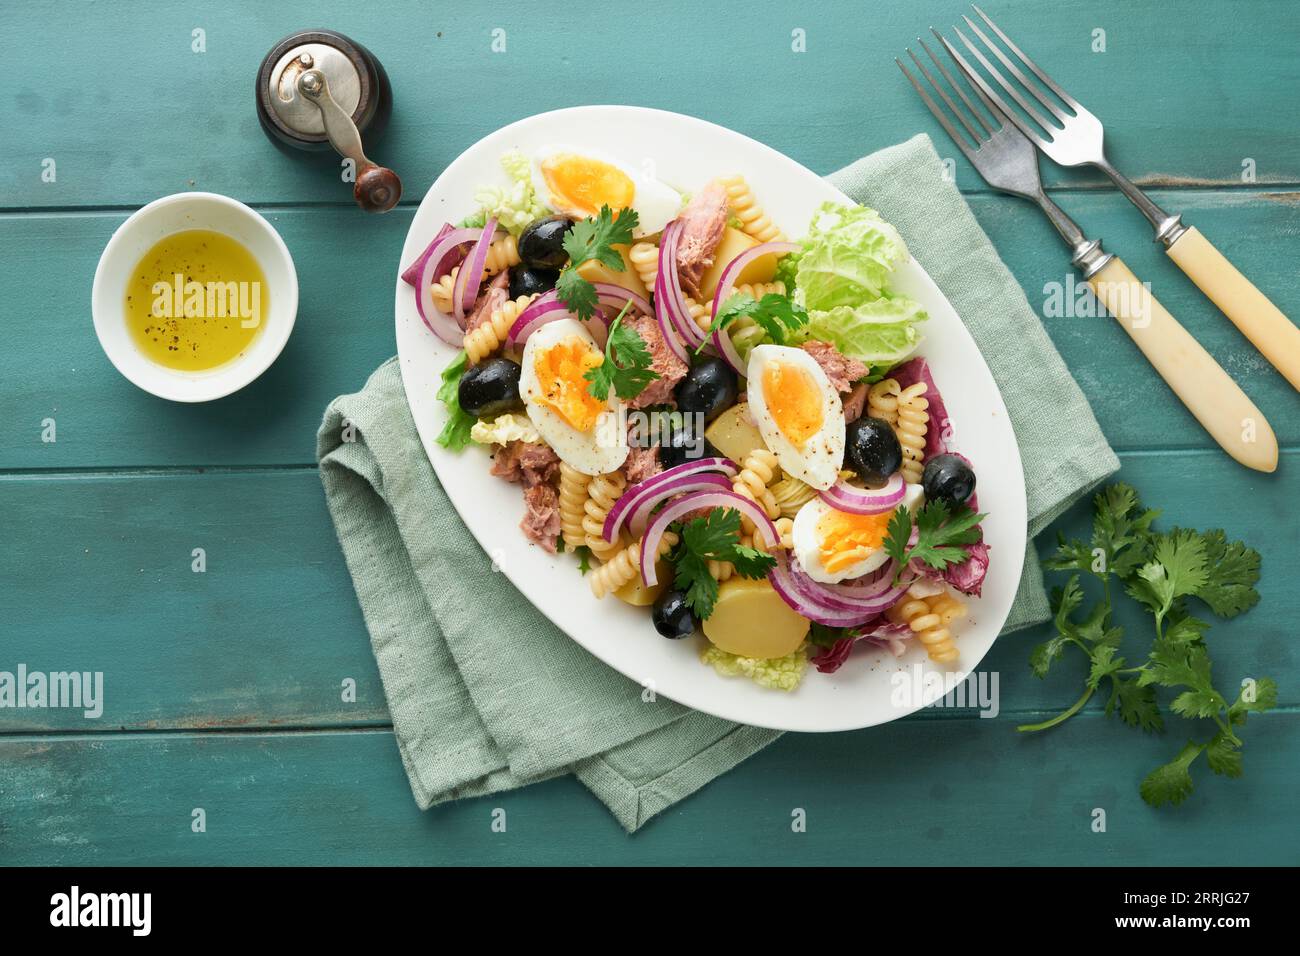 Tuna salad with pasta, eggs, potatoes, olives, red onions and sauce in white plate on old turquoise wooden rustic table background. Nicoise salad. Fre Stock Photo